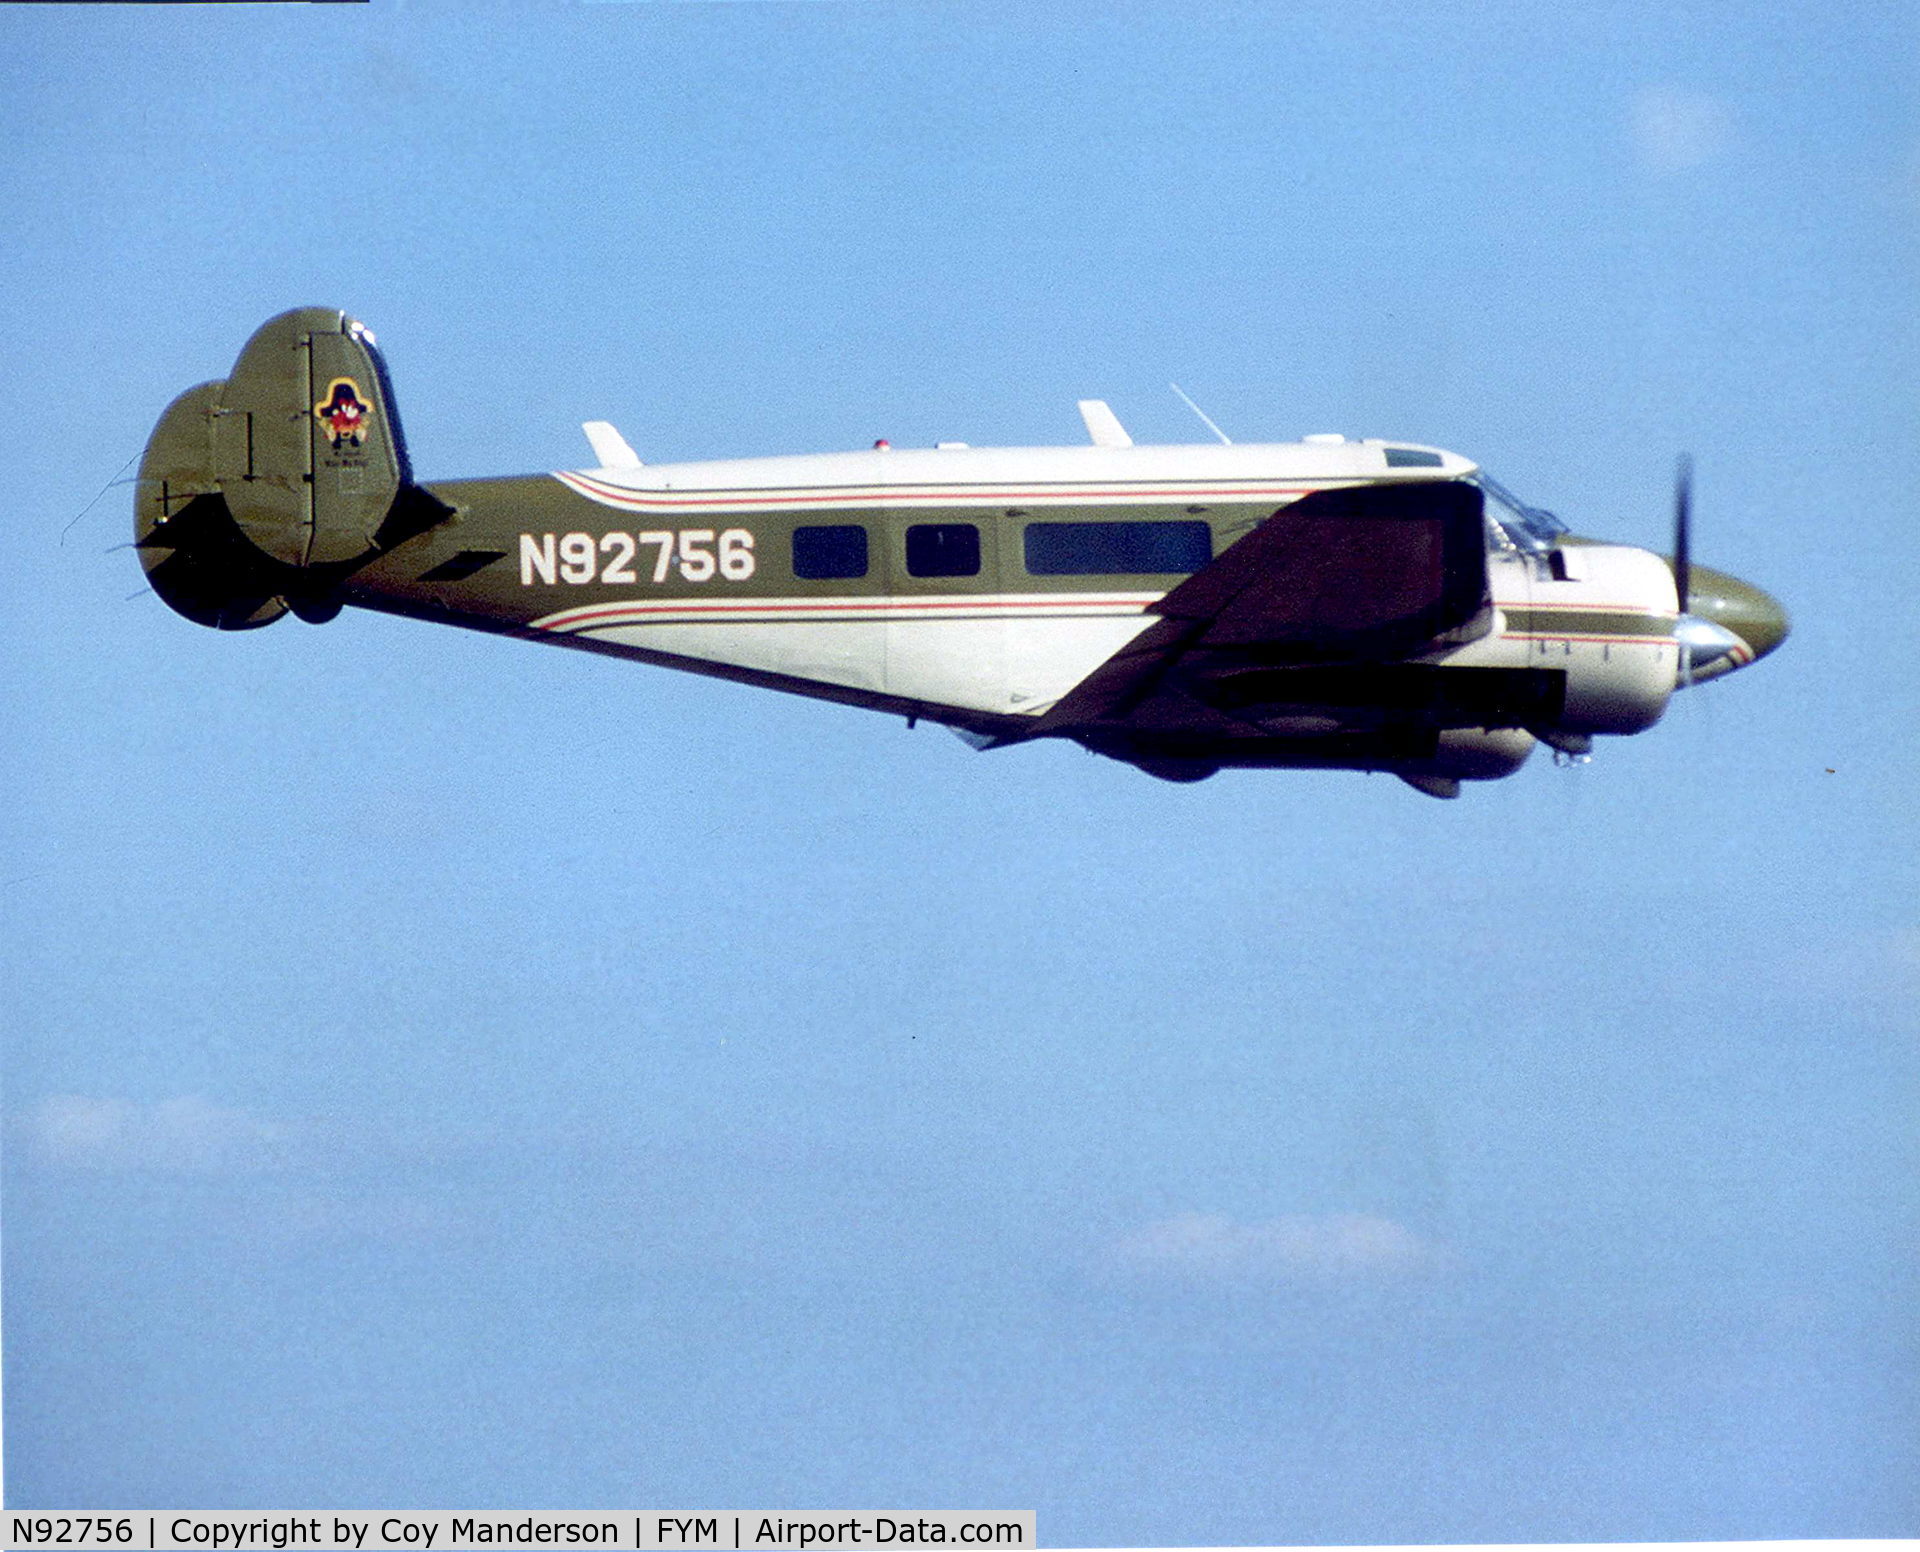 N92756, 1965 Beech H-18 C/N BA-728, Picture taken in 1999. Owned at that time by M&M Air Service, Inc